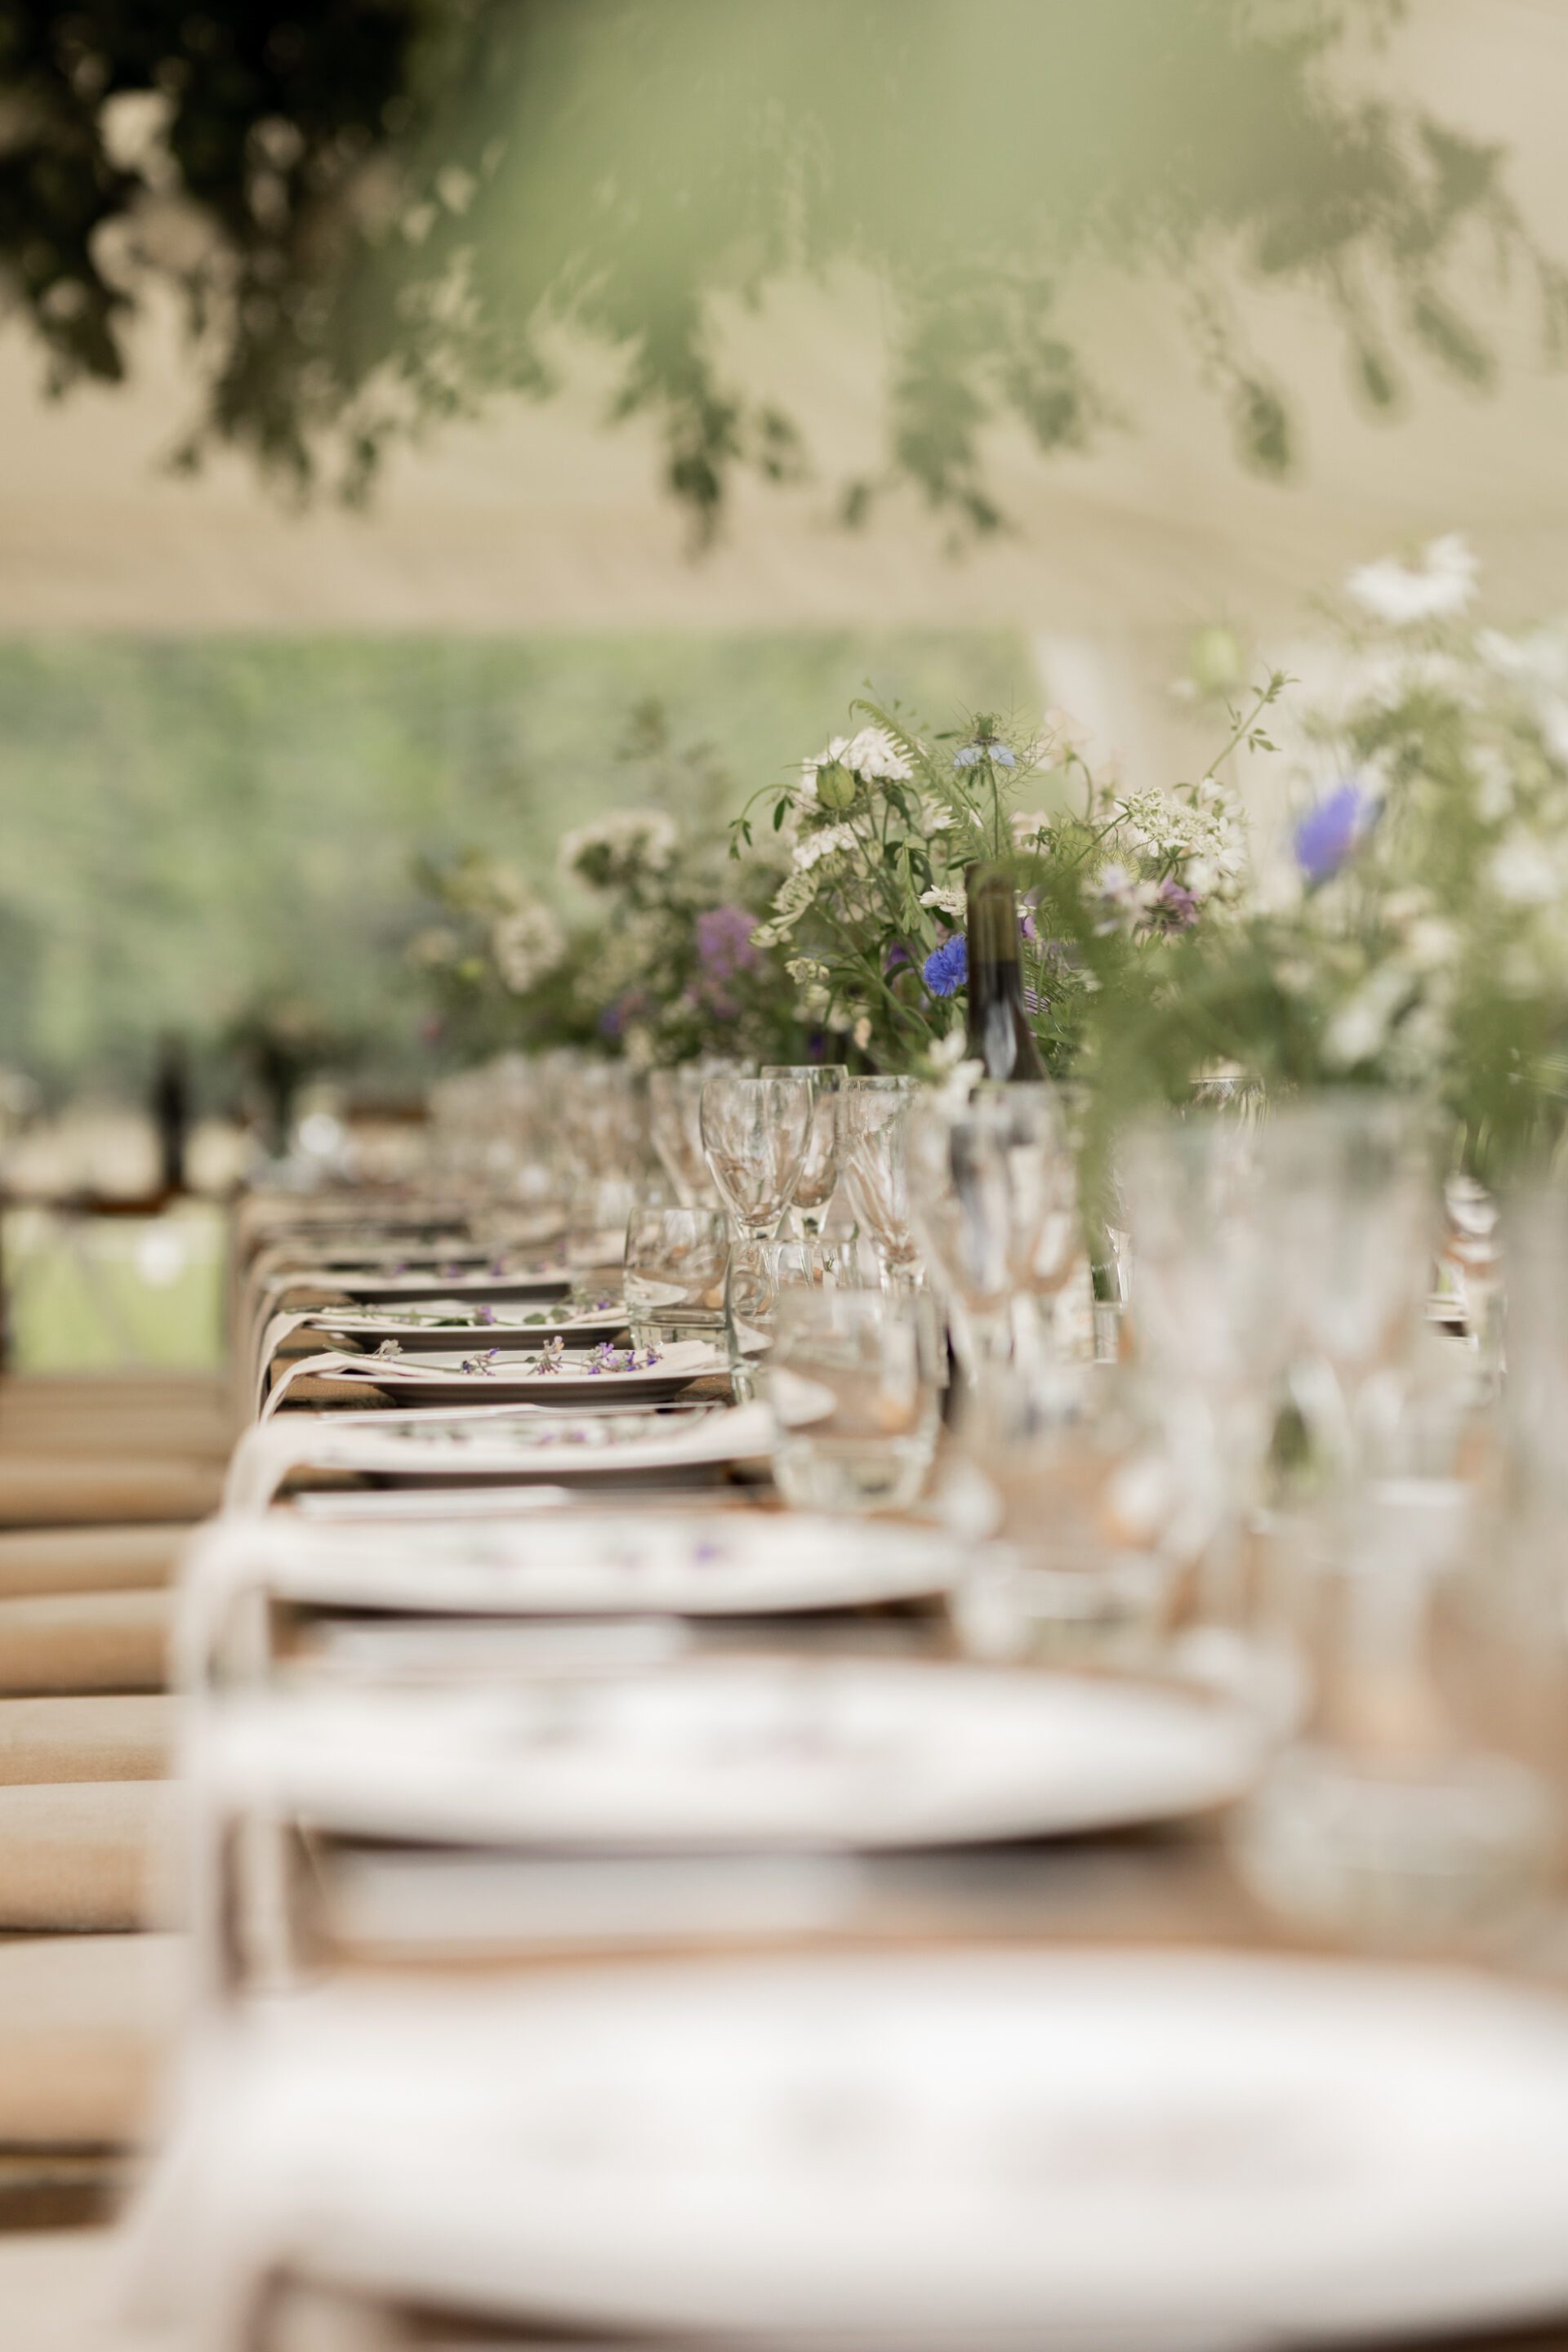 The simple table settings await the guests at this Devon marquee wedding